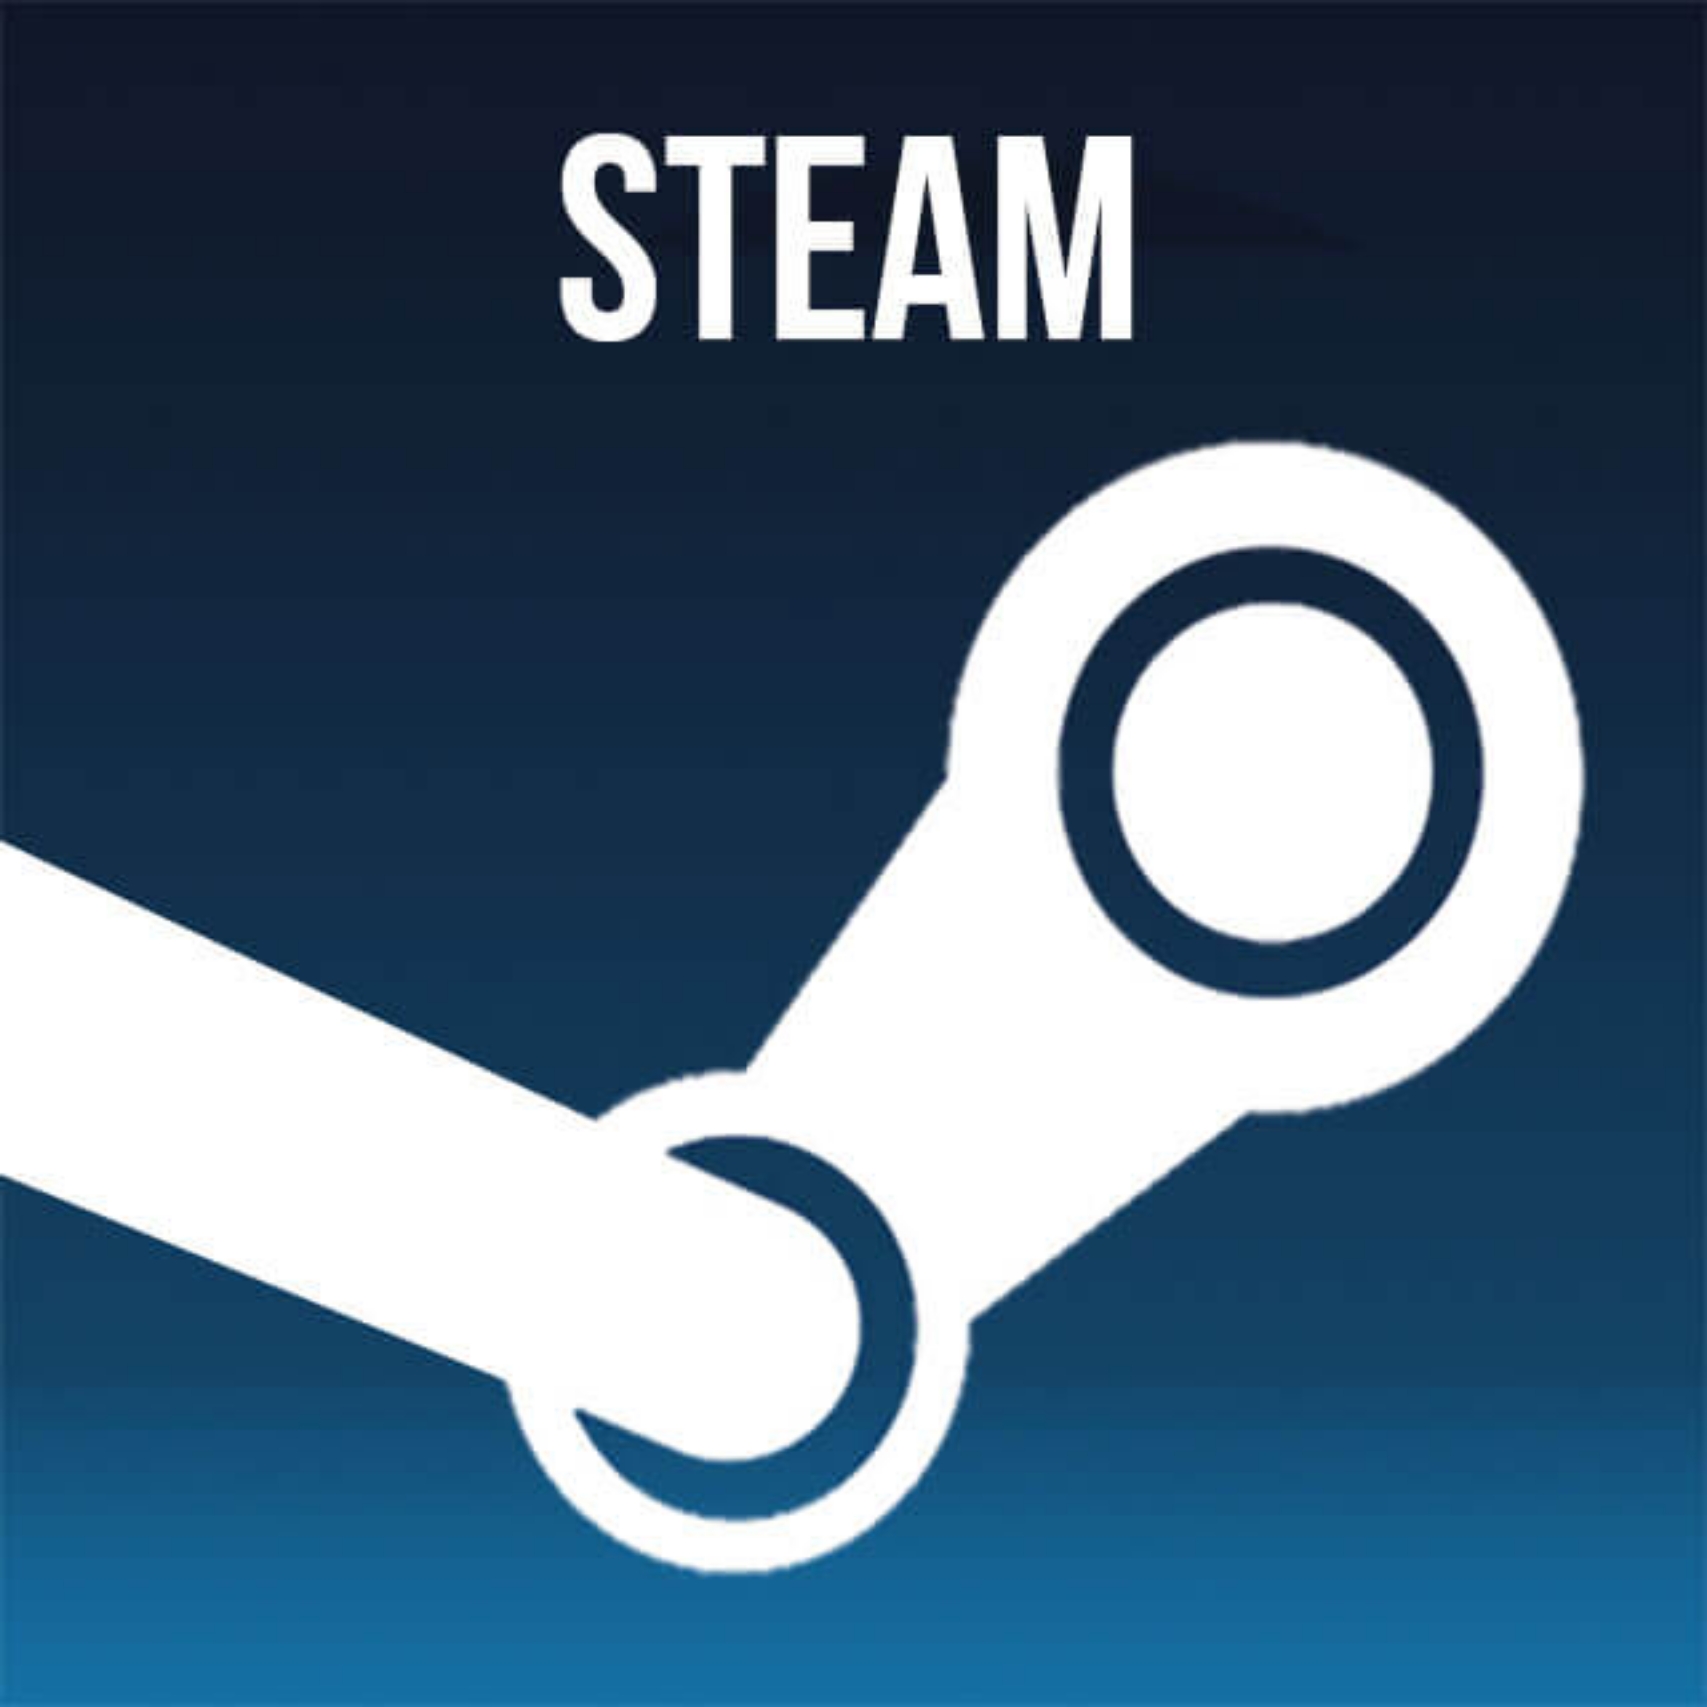 Any second steam фото 101